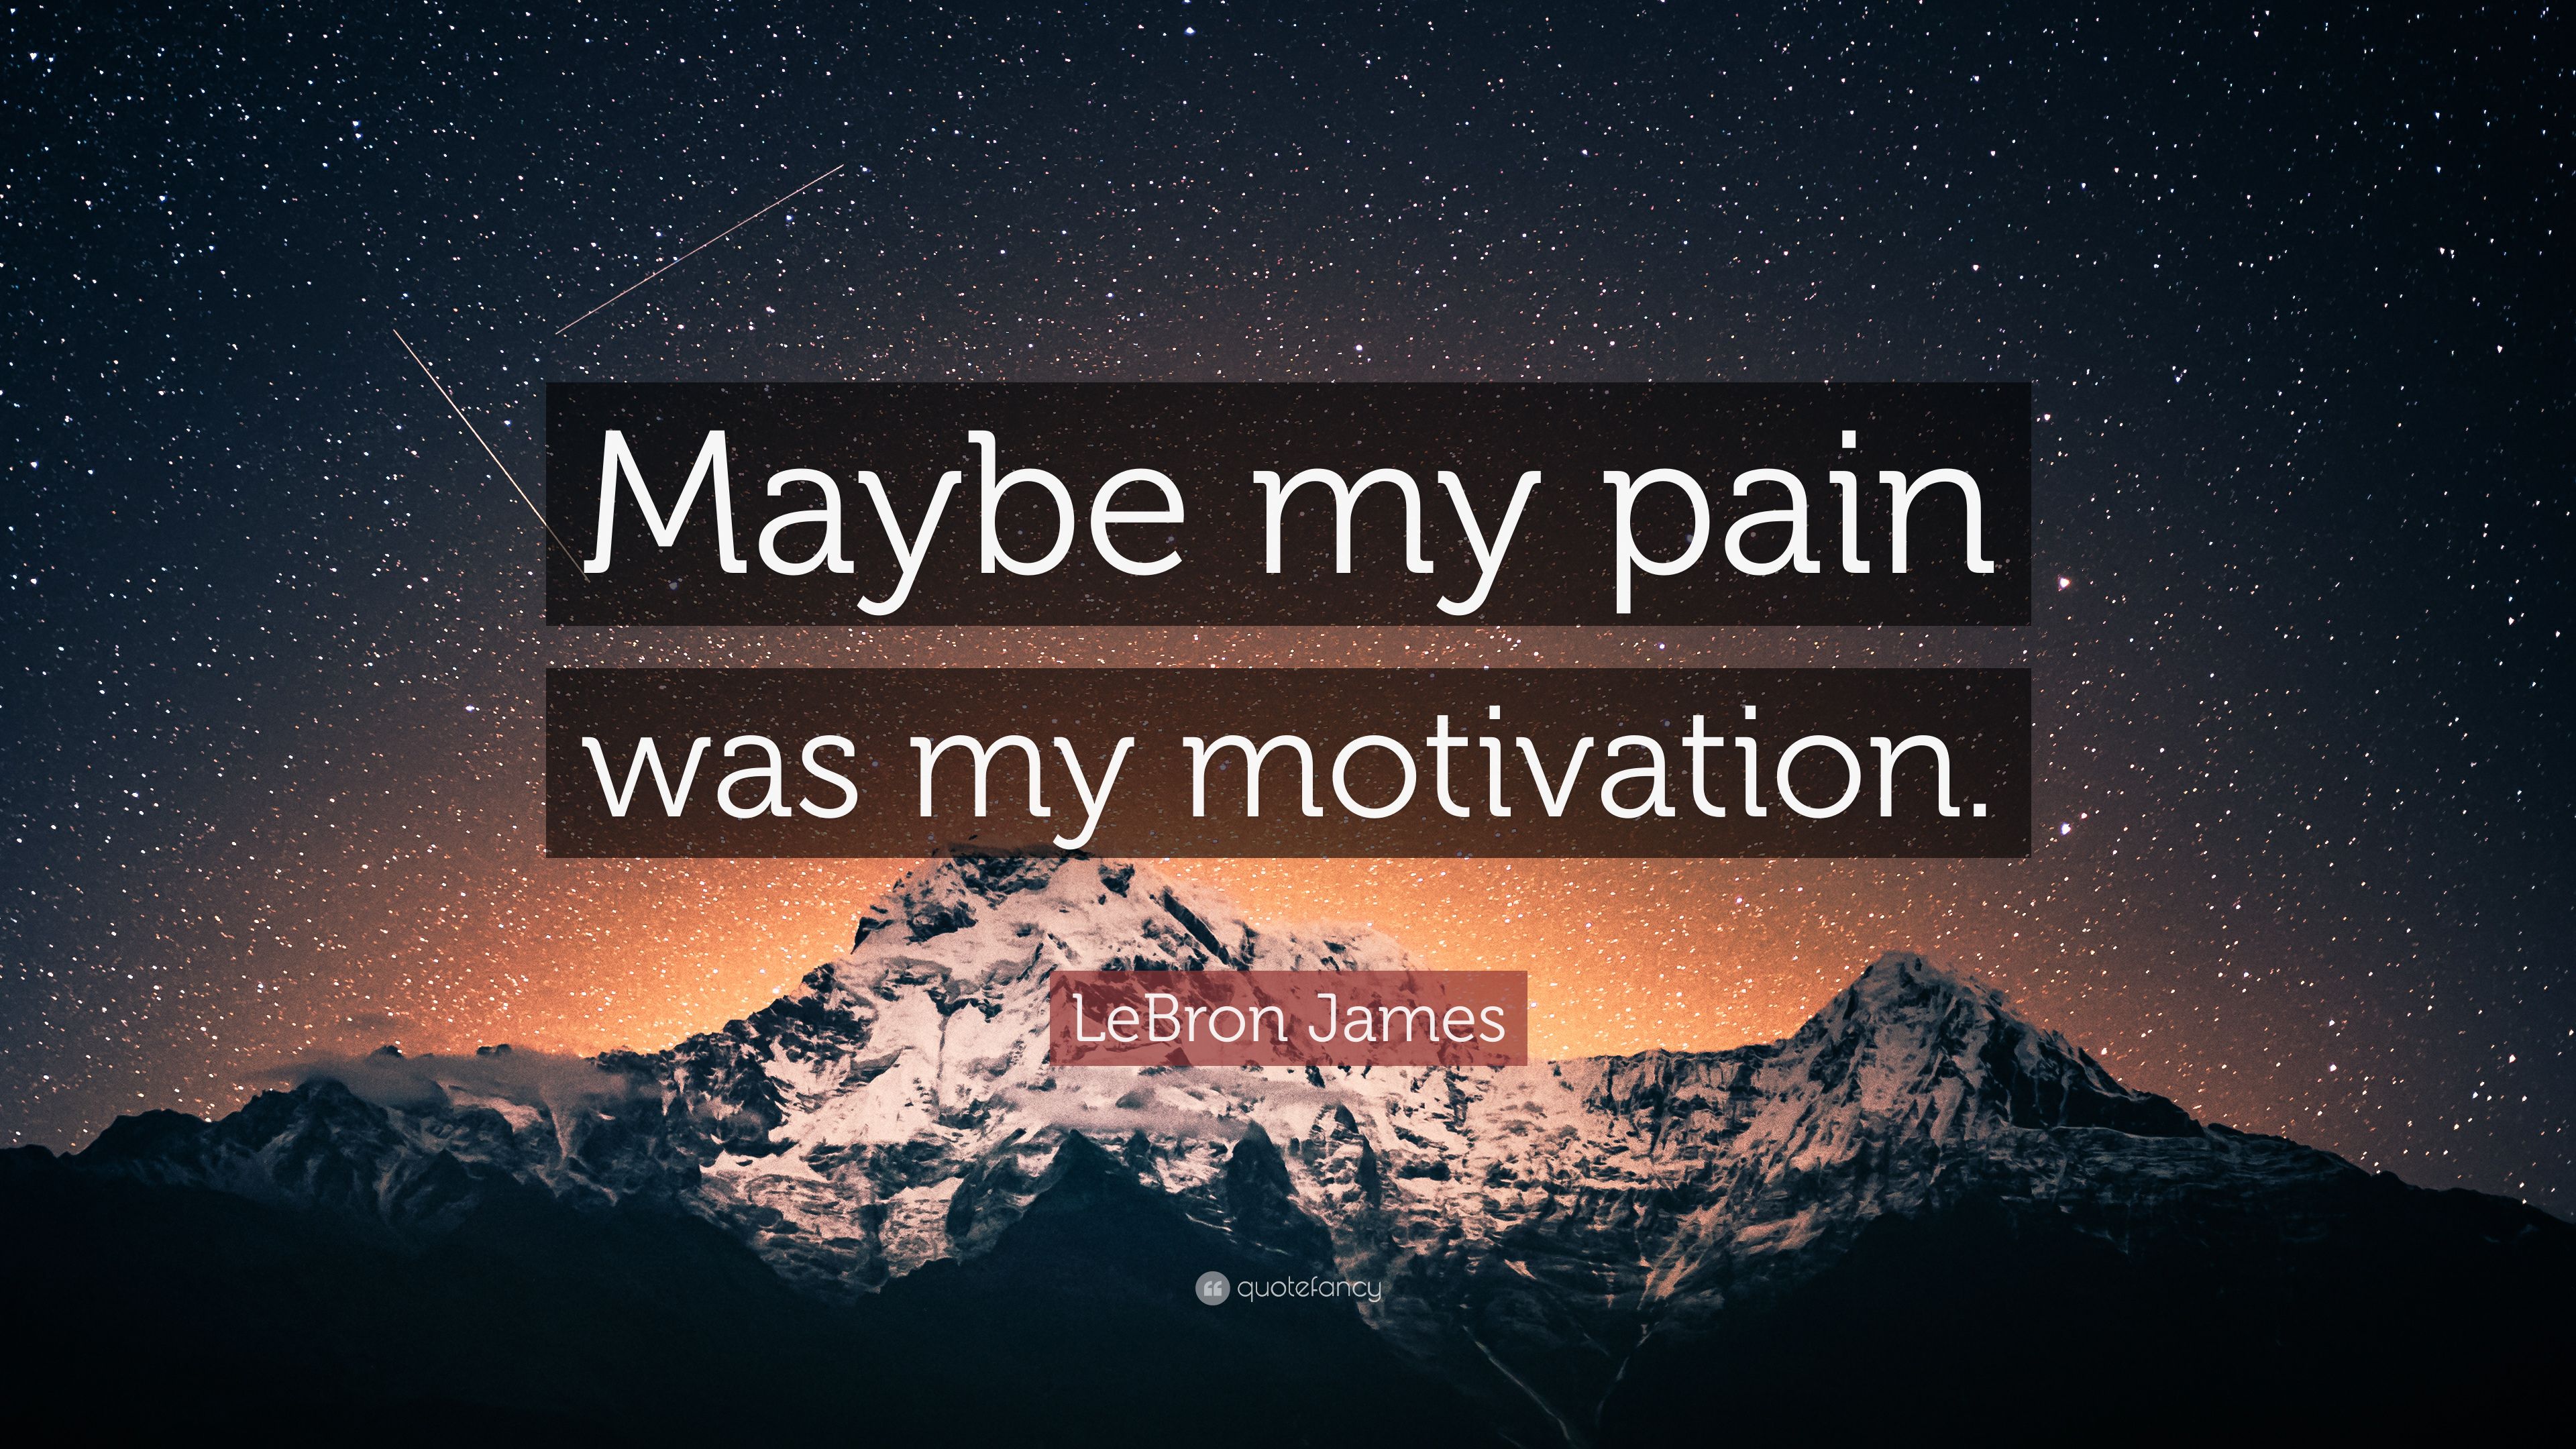 LeBron James Quote: “Maybe my pain was my motivation.” 12